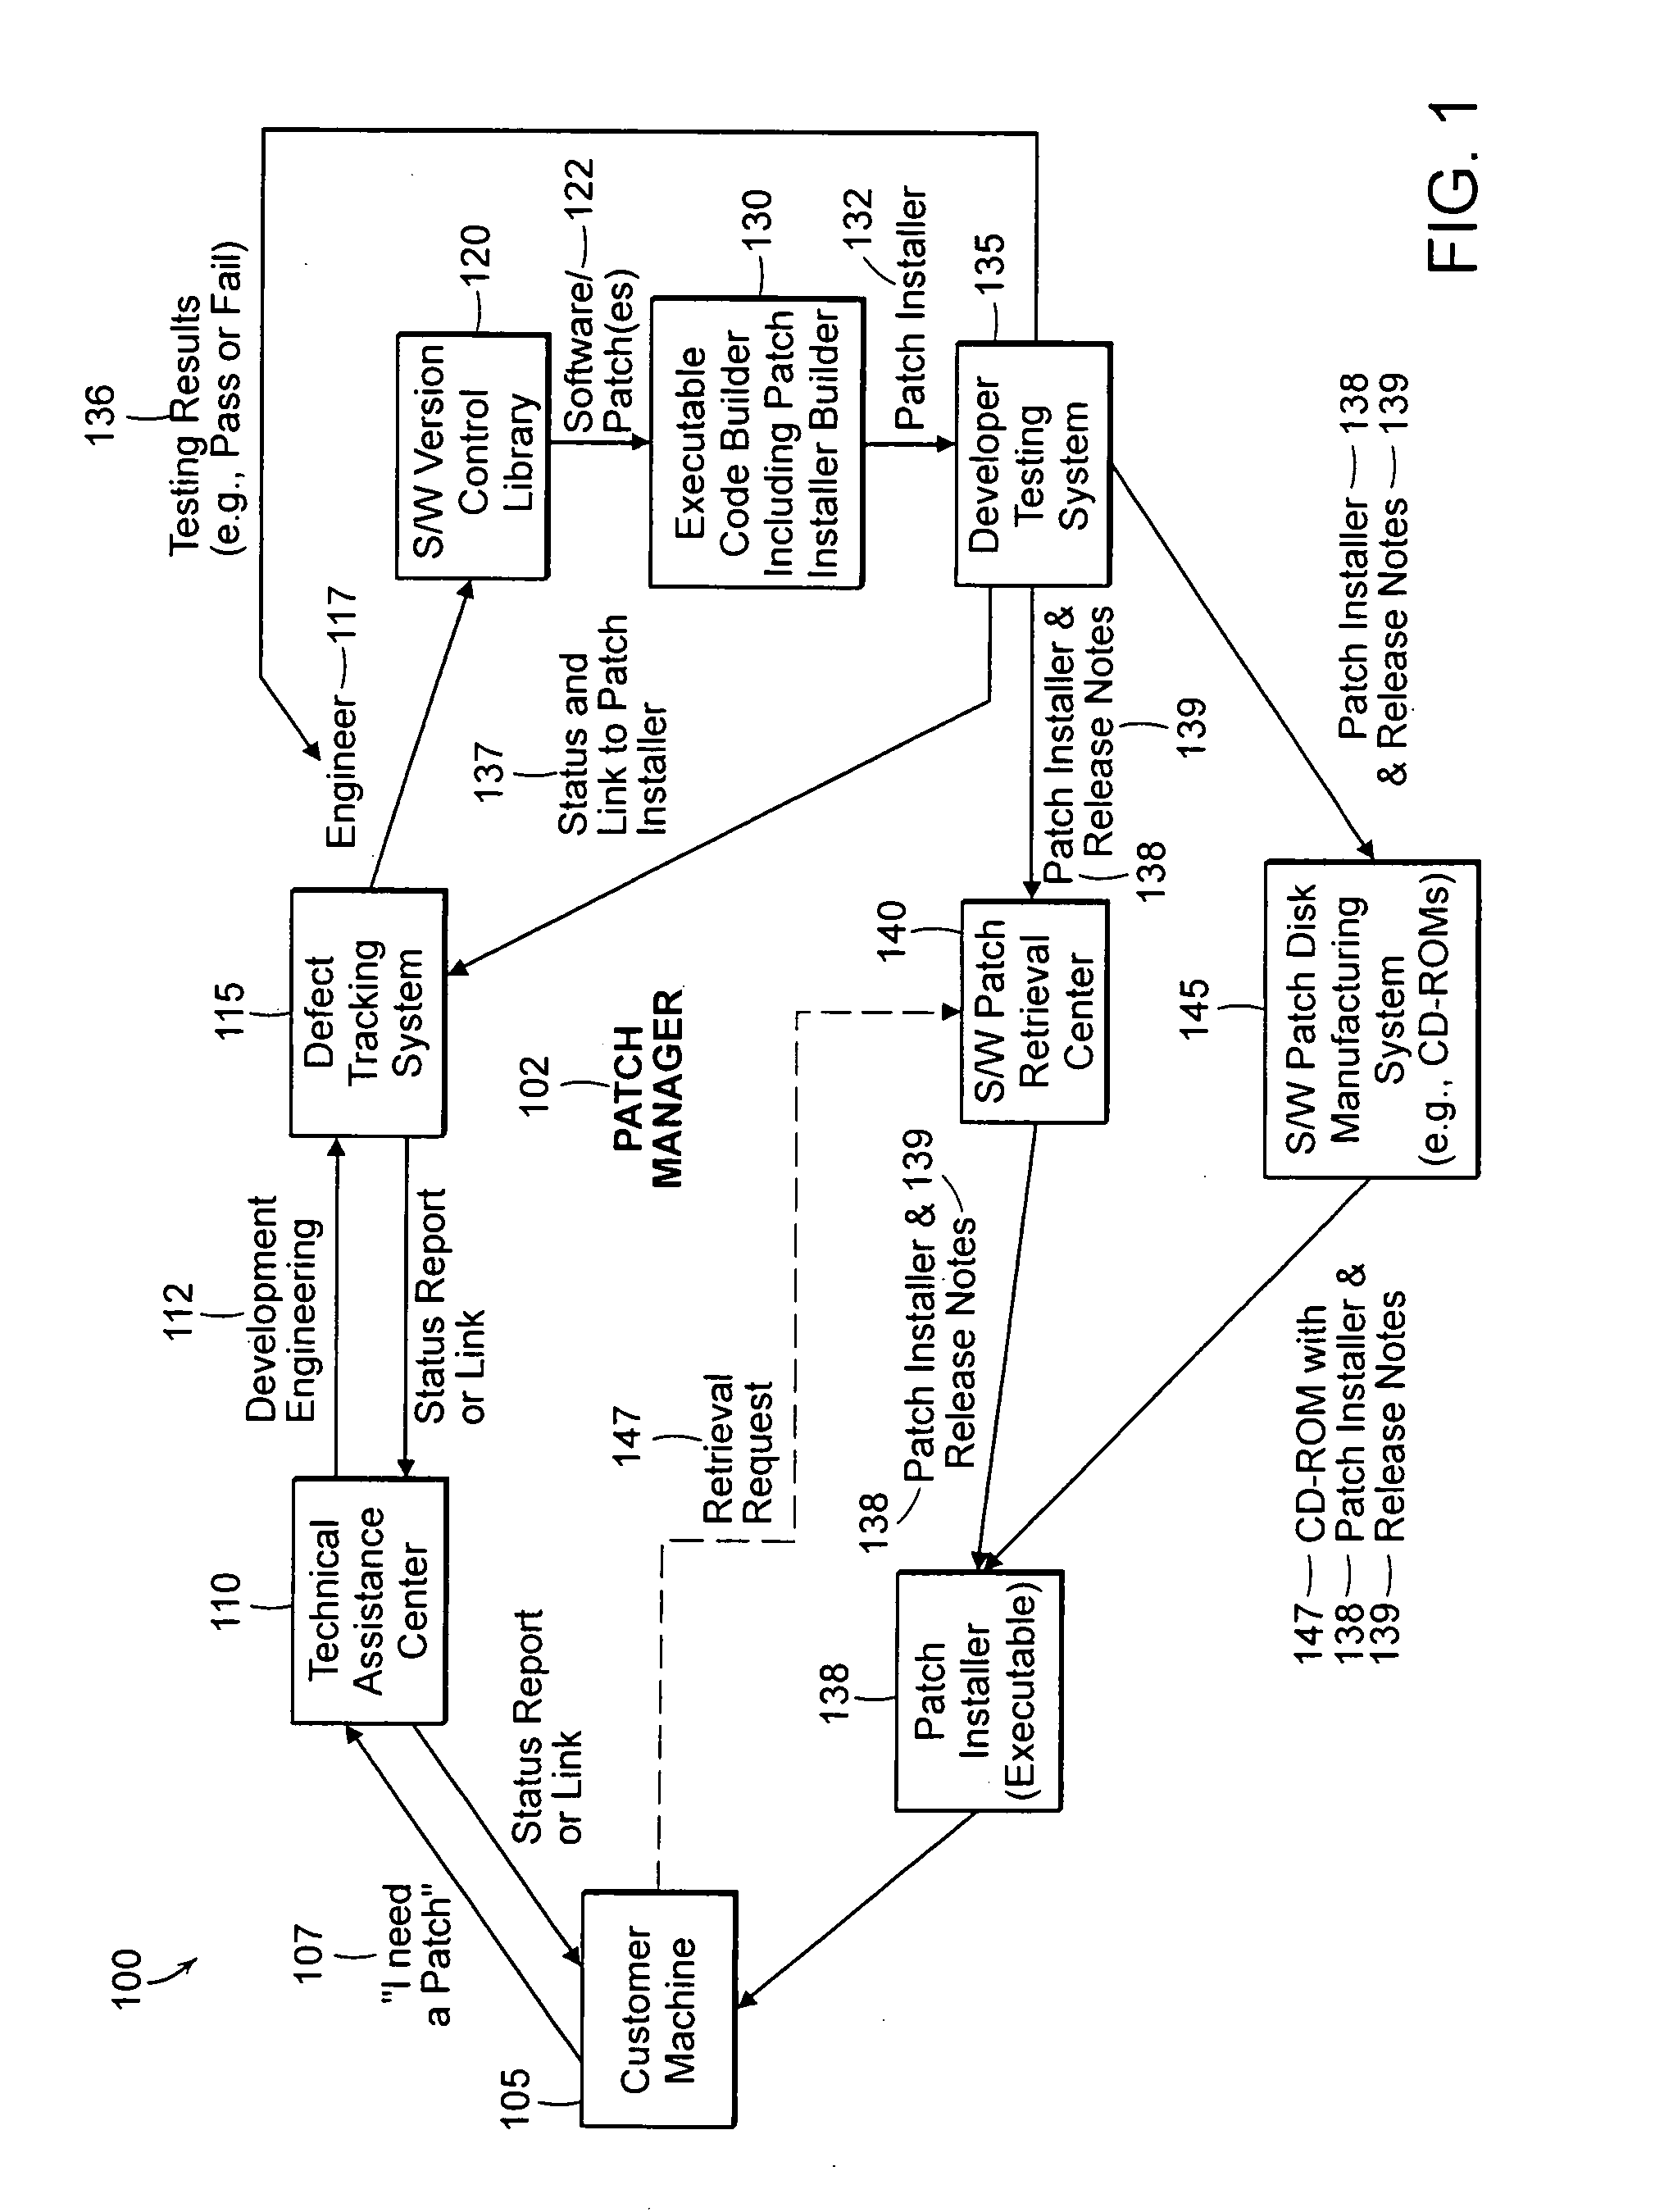 Method and apparatus for determining least risk install order of software patches